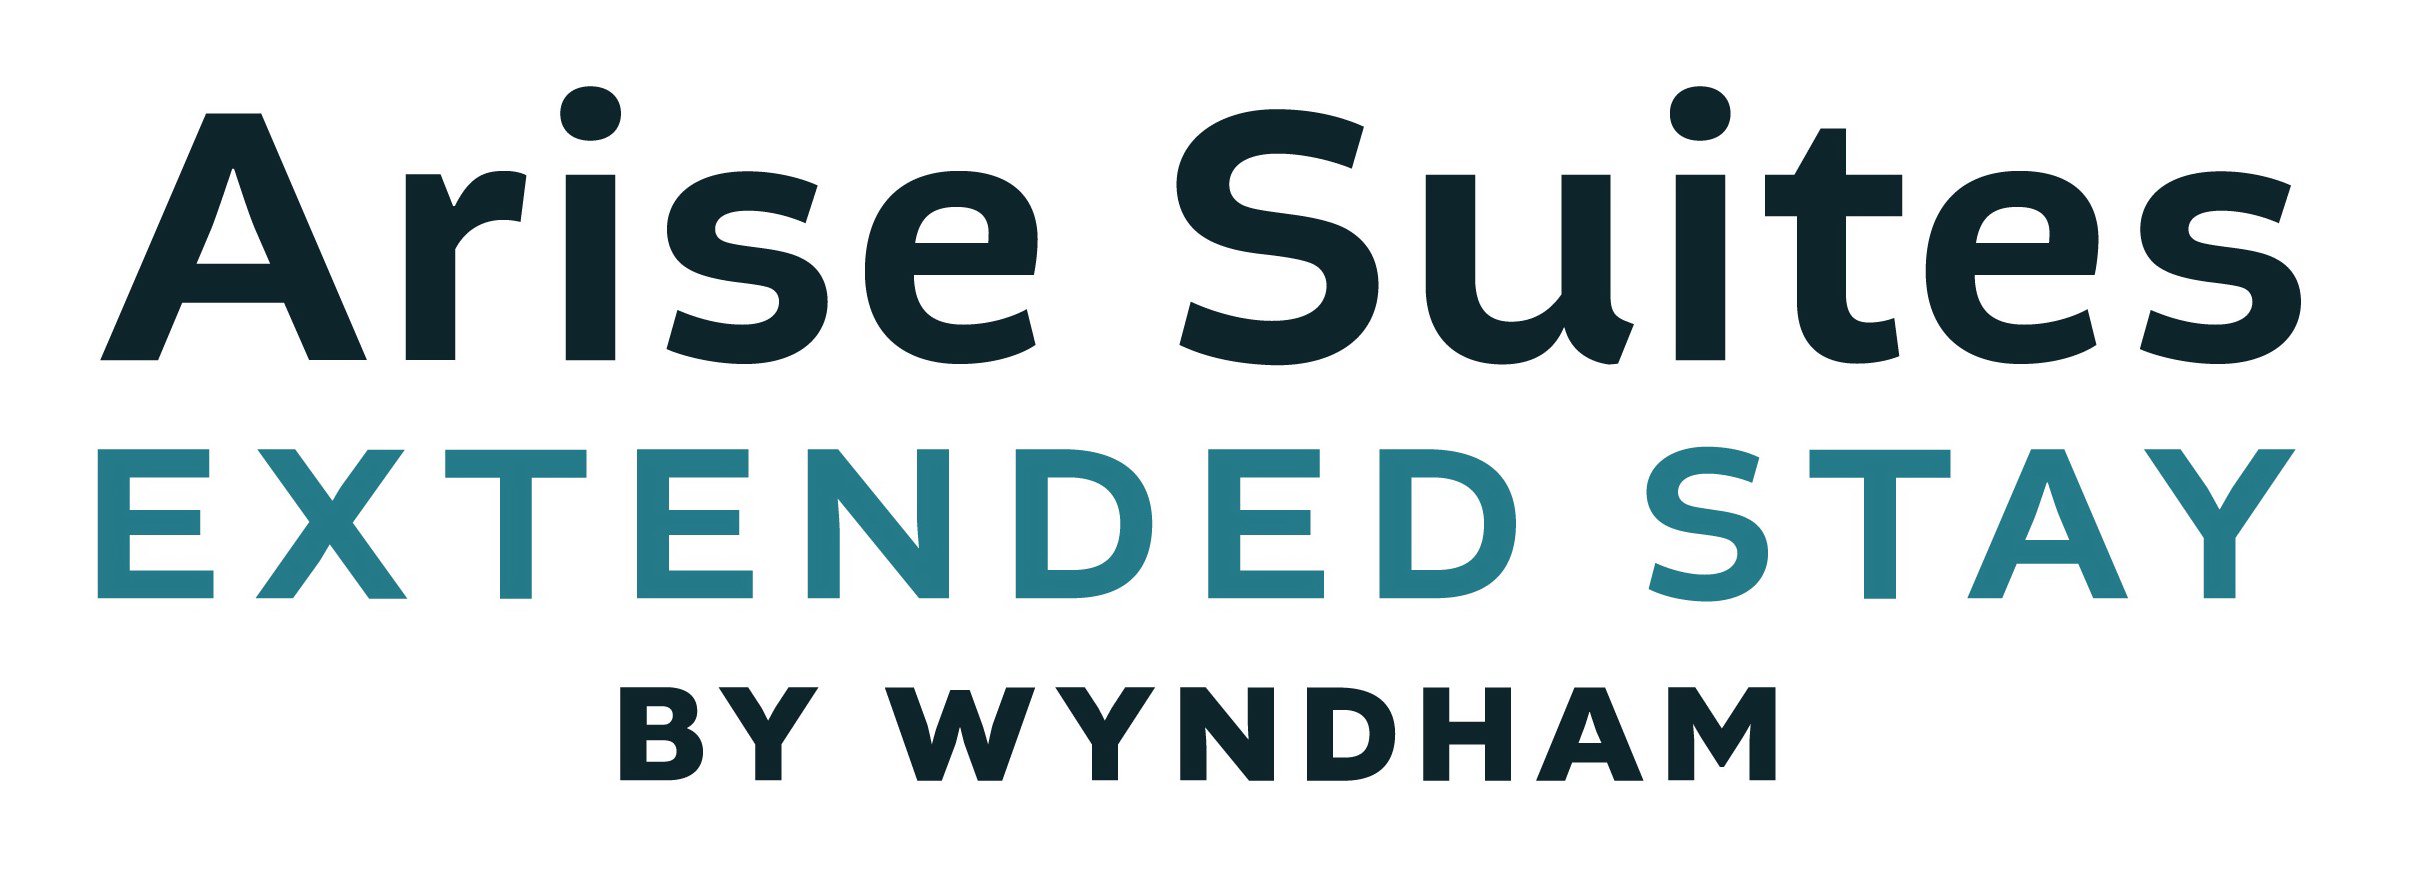  ARISE SUITES EXTENDED STAY BY WYNDHAM